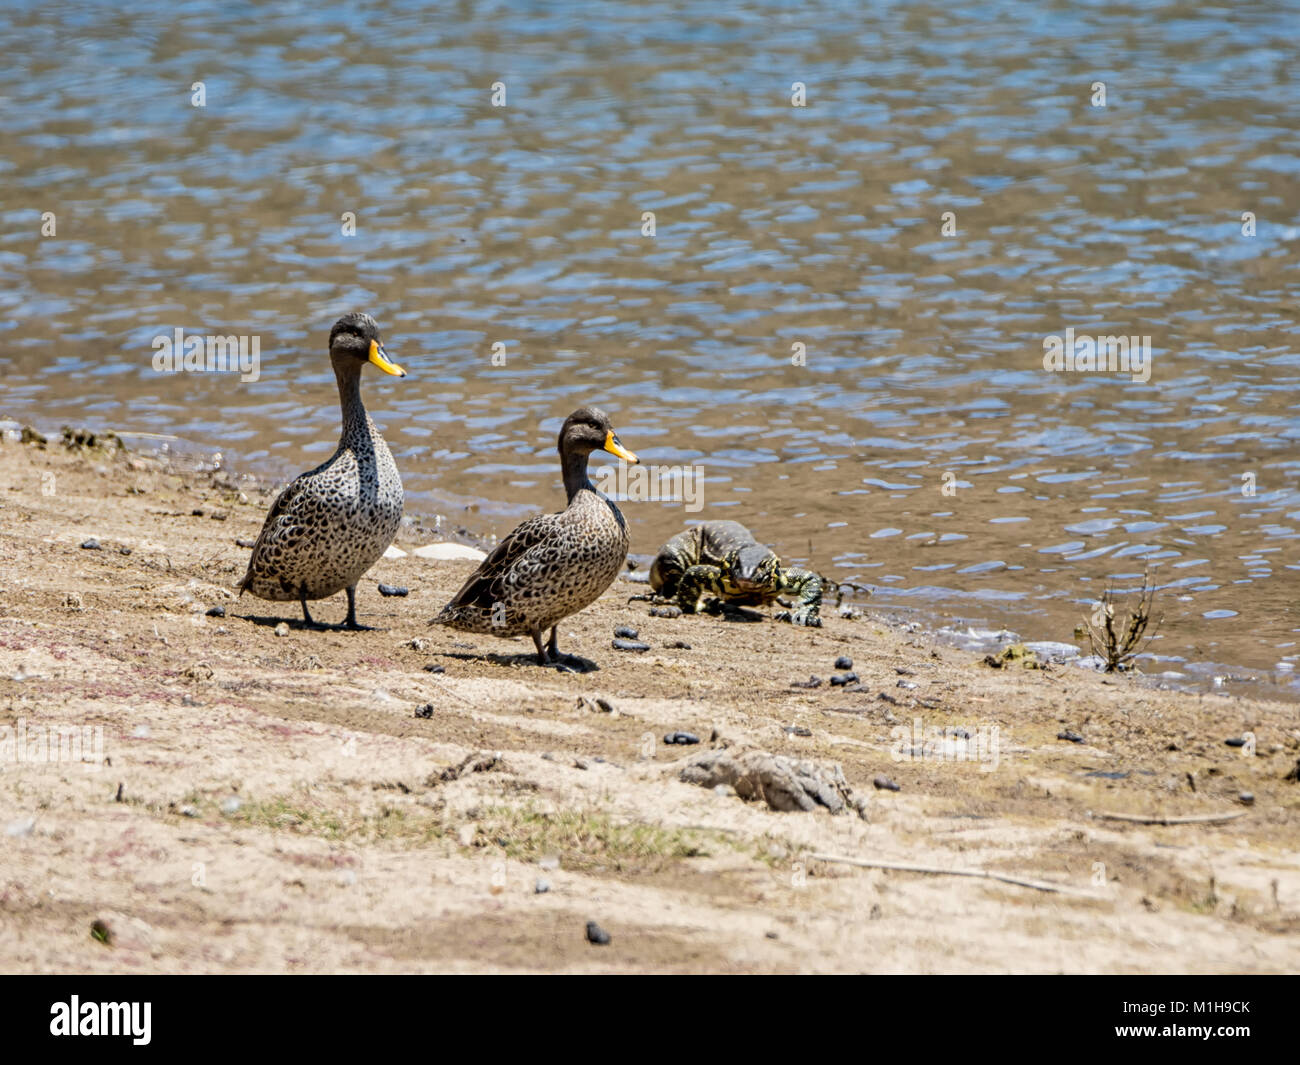 A Nile Monitor and Yellow-billed Ducks at a watering hole in Southern African savanna Stock Photo